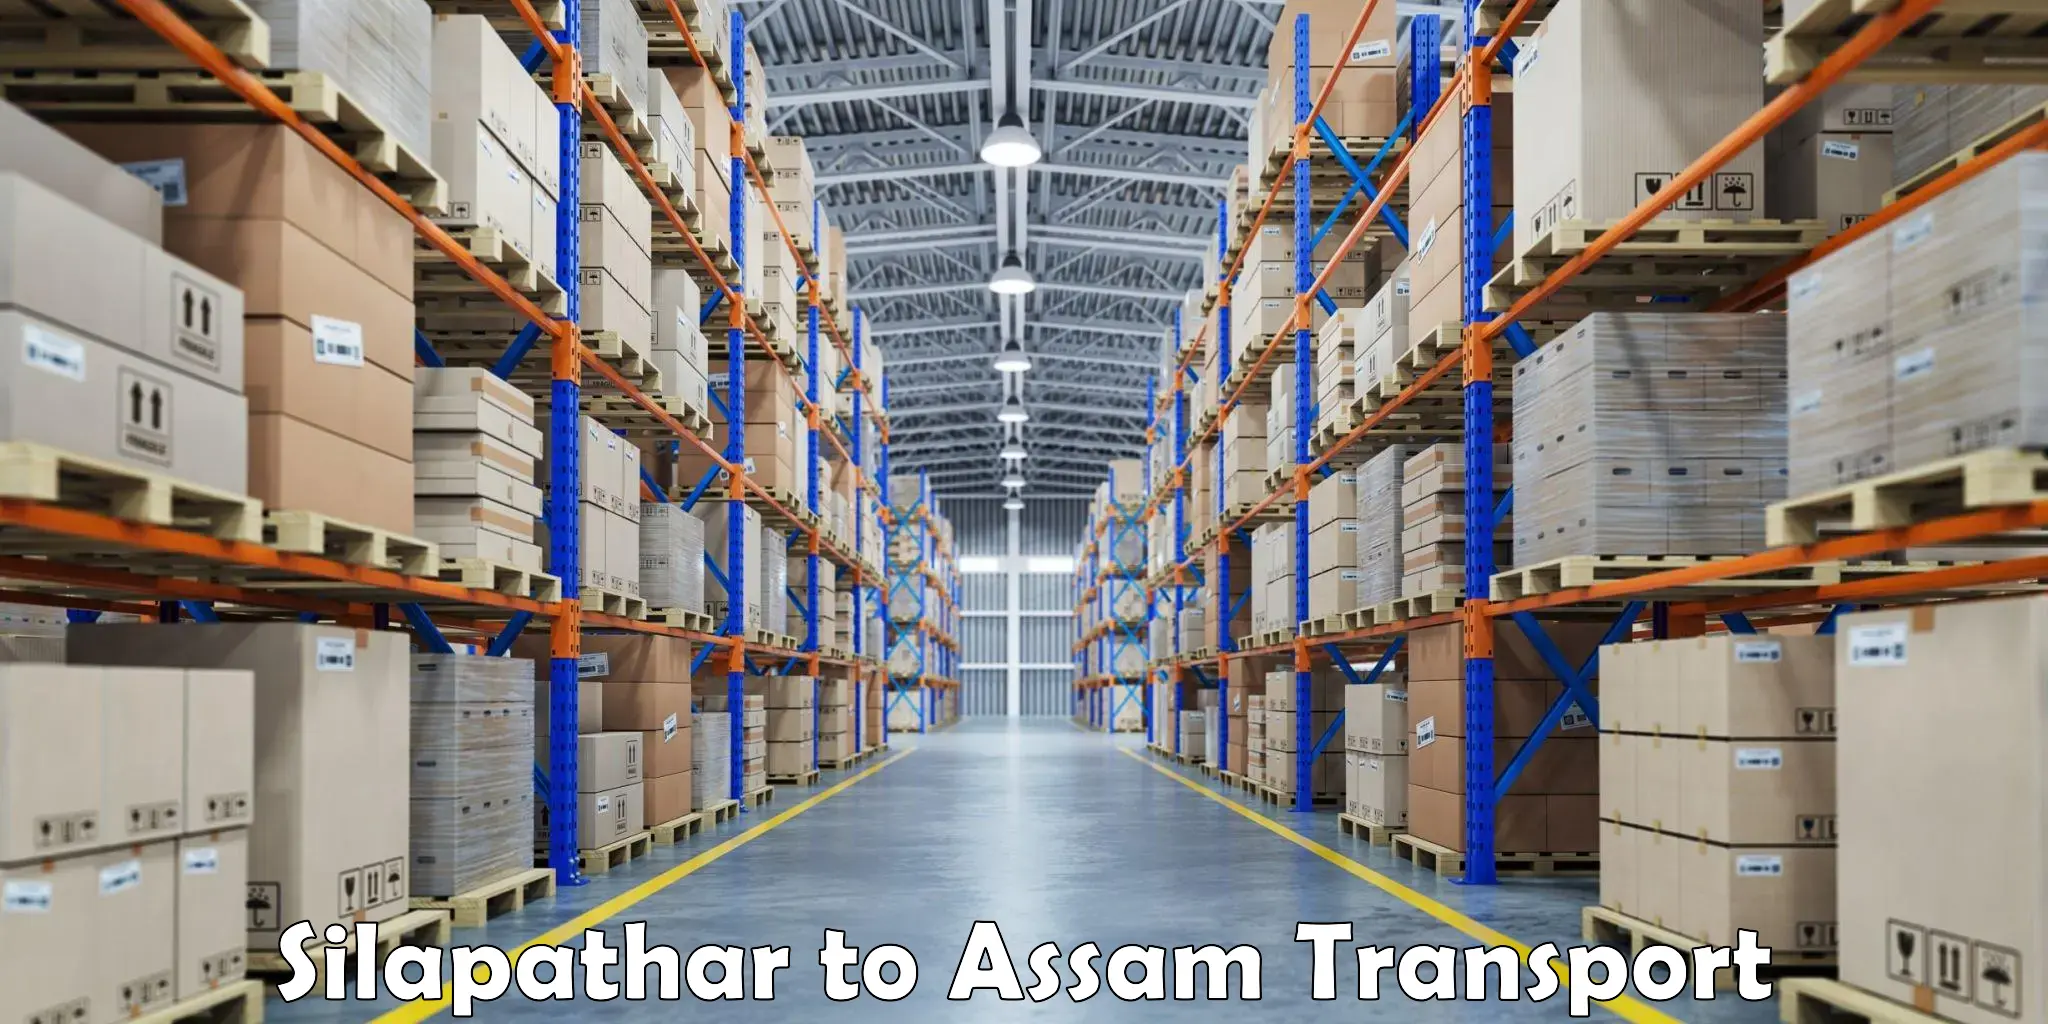 Online transport service Silapathar to Assam